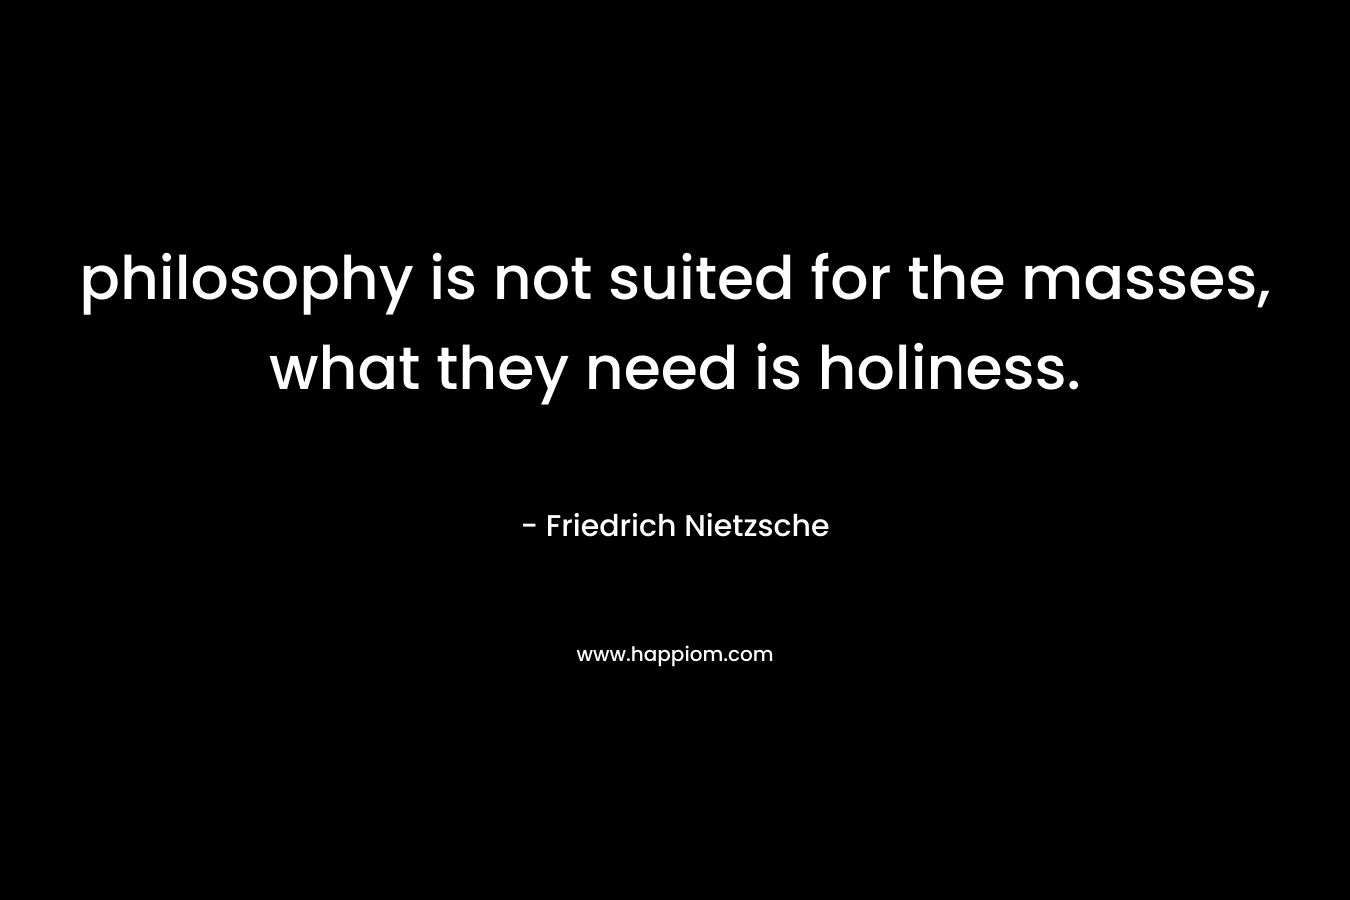 philosophy is not suited for the masses, what they need is holiness. – Friedrich Nietzsche